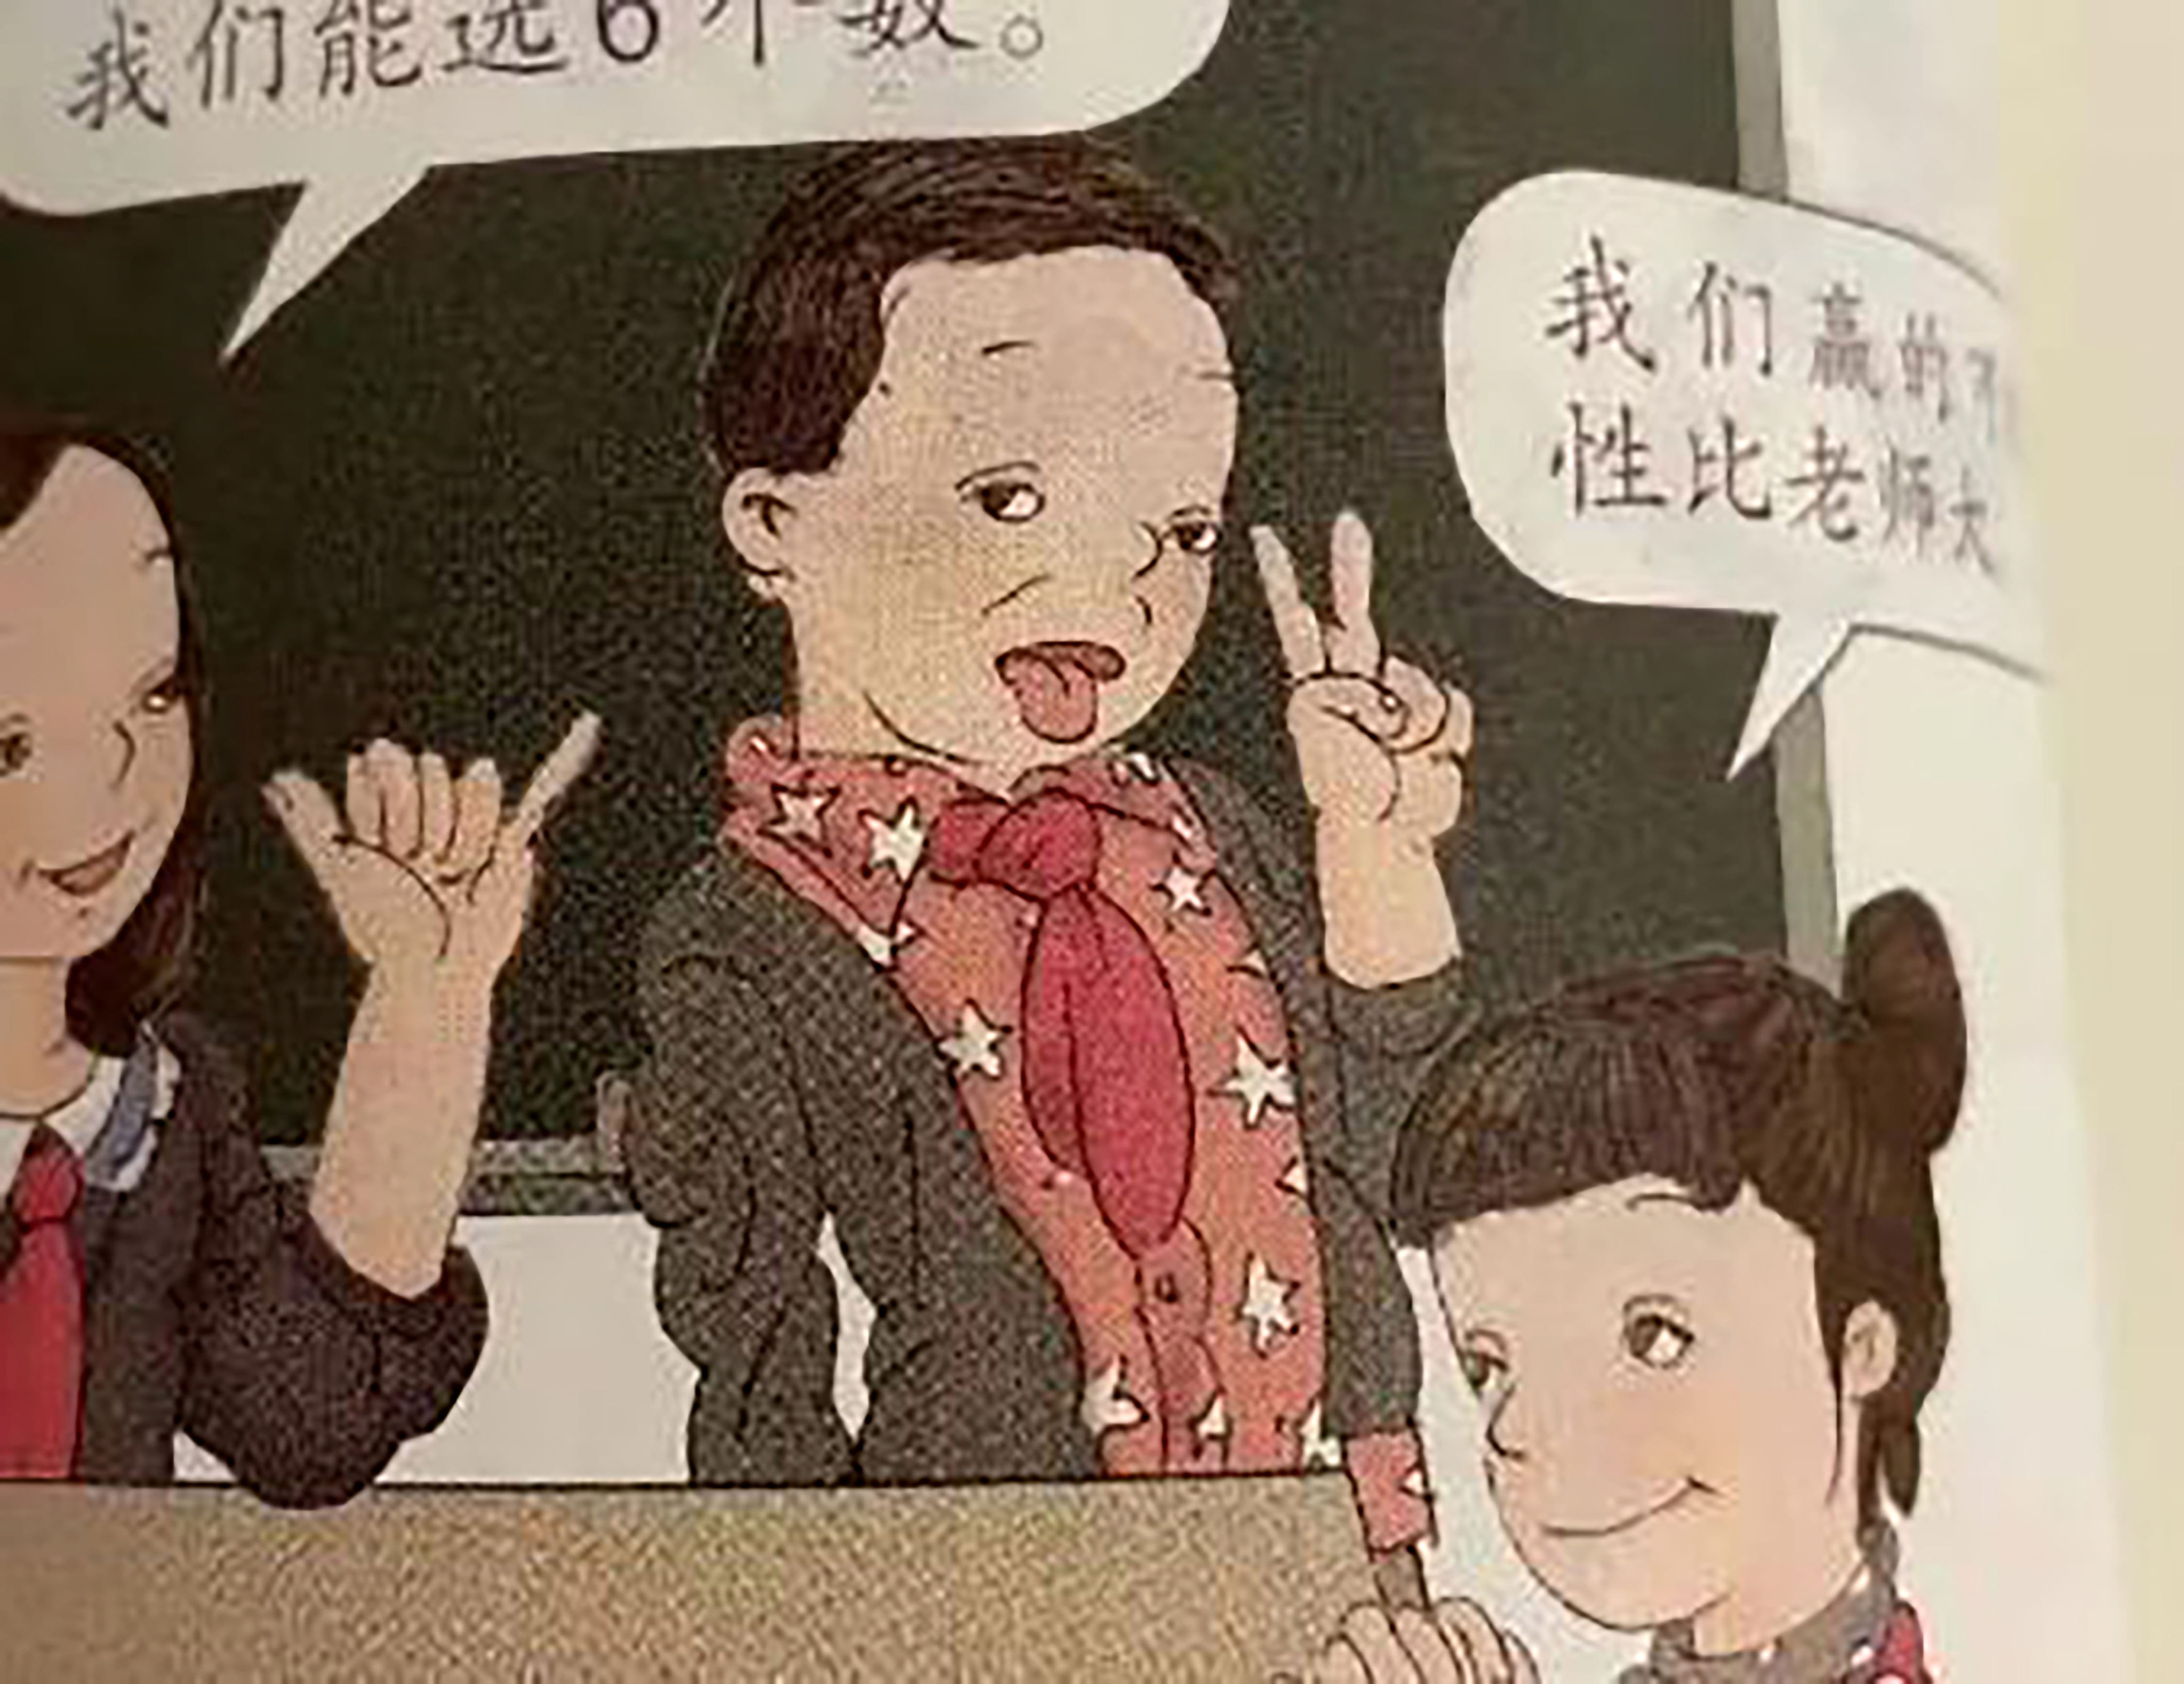 China’s education ministry said the maths textbook illustrations were “not uplifting” and fell short of the “basic requirements of moral education”. Photo: Handout